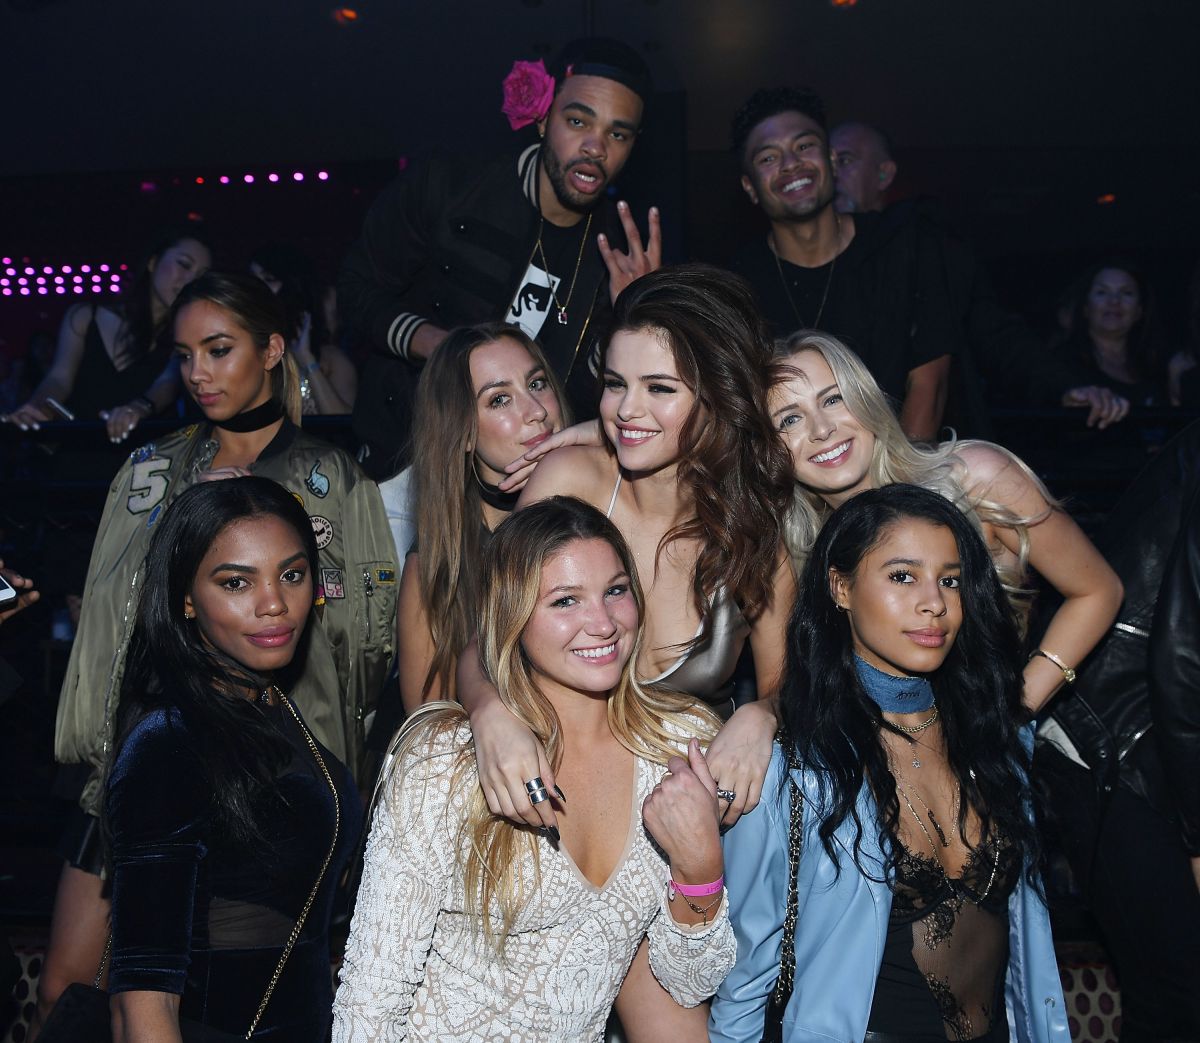 selena-gomez-at-revial-tour-after-party-in-las-vegas-05-06-2016_9.jpg